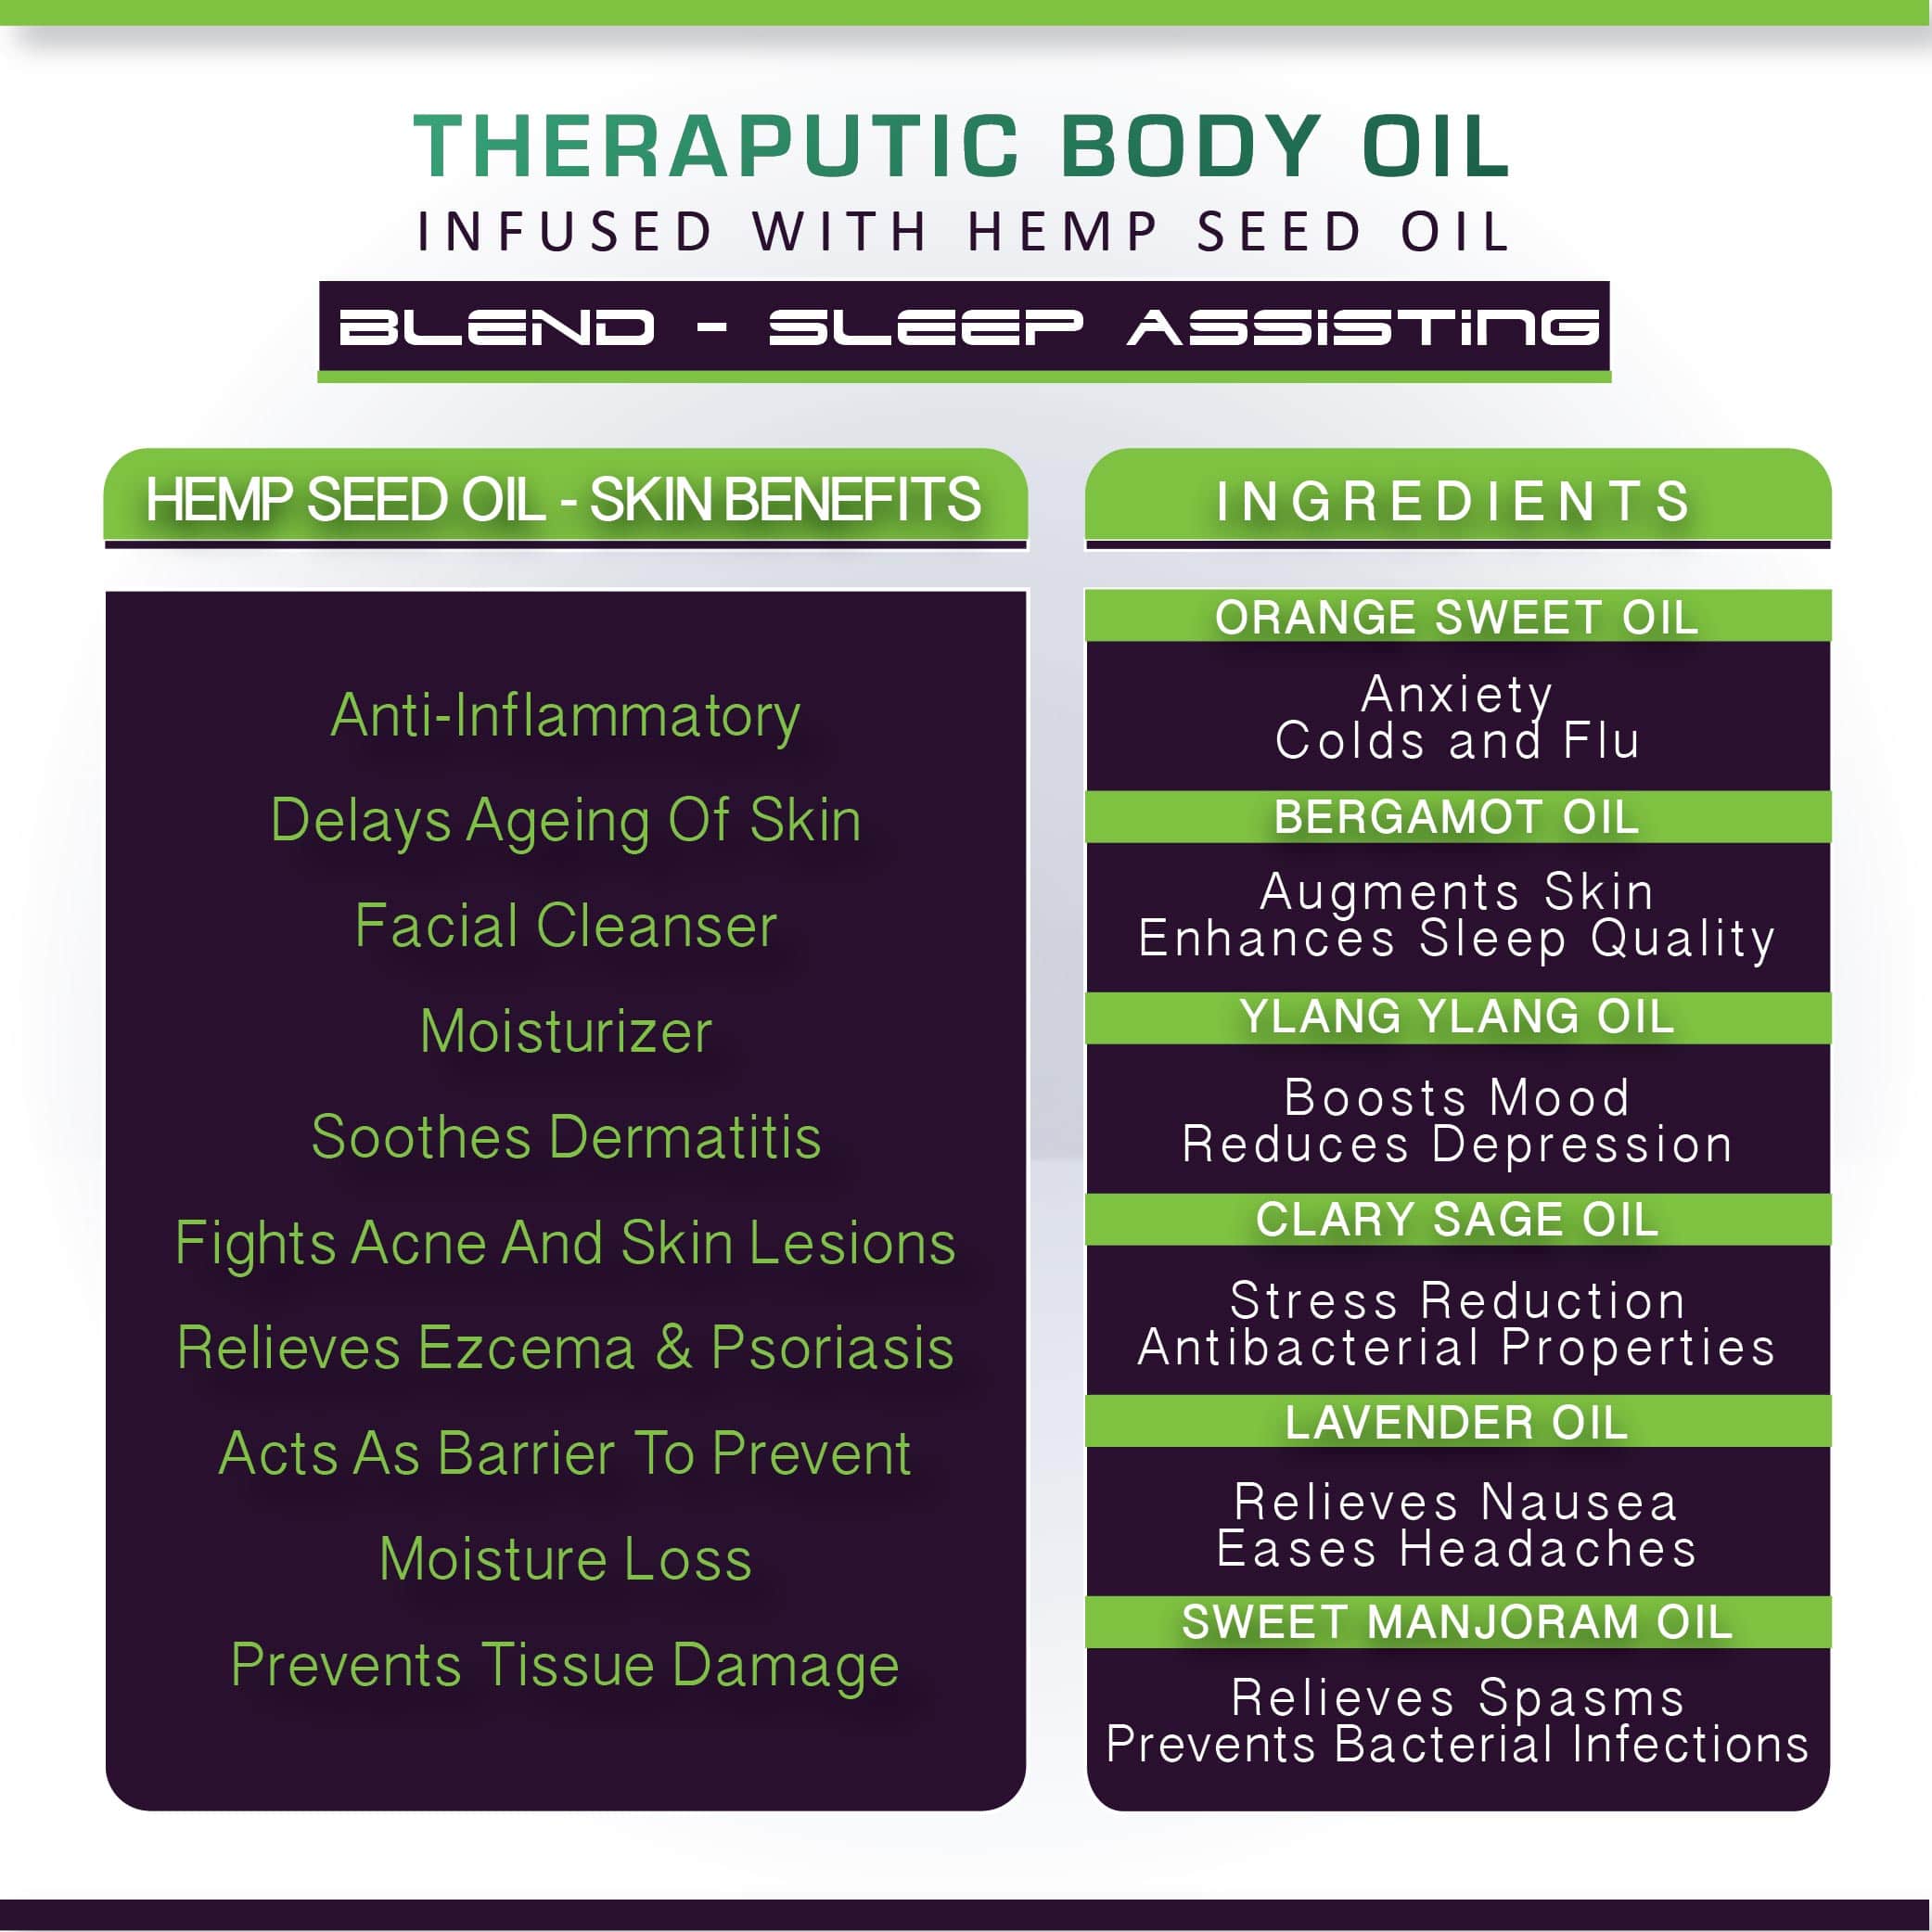 Cure By Design Theraputic Body Oil Infused with Hemp Seed Oil for Sleep Assisting